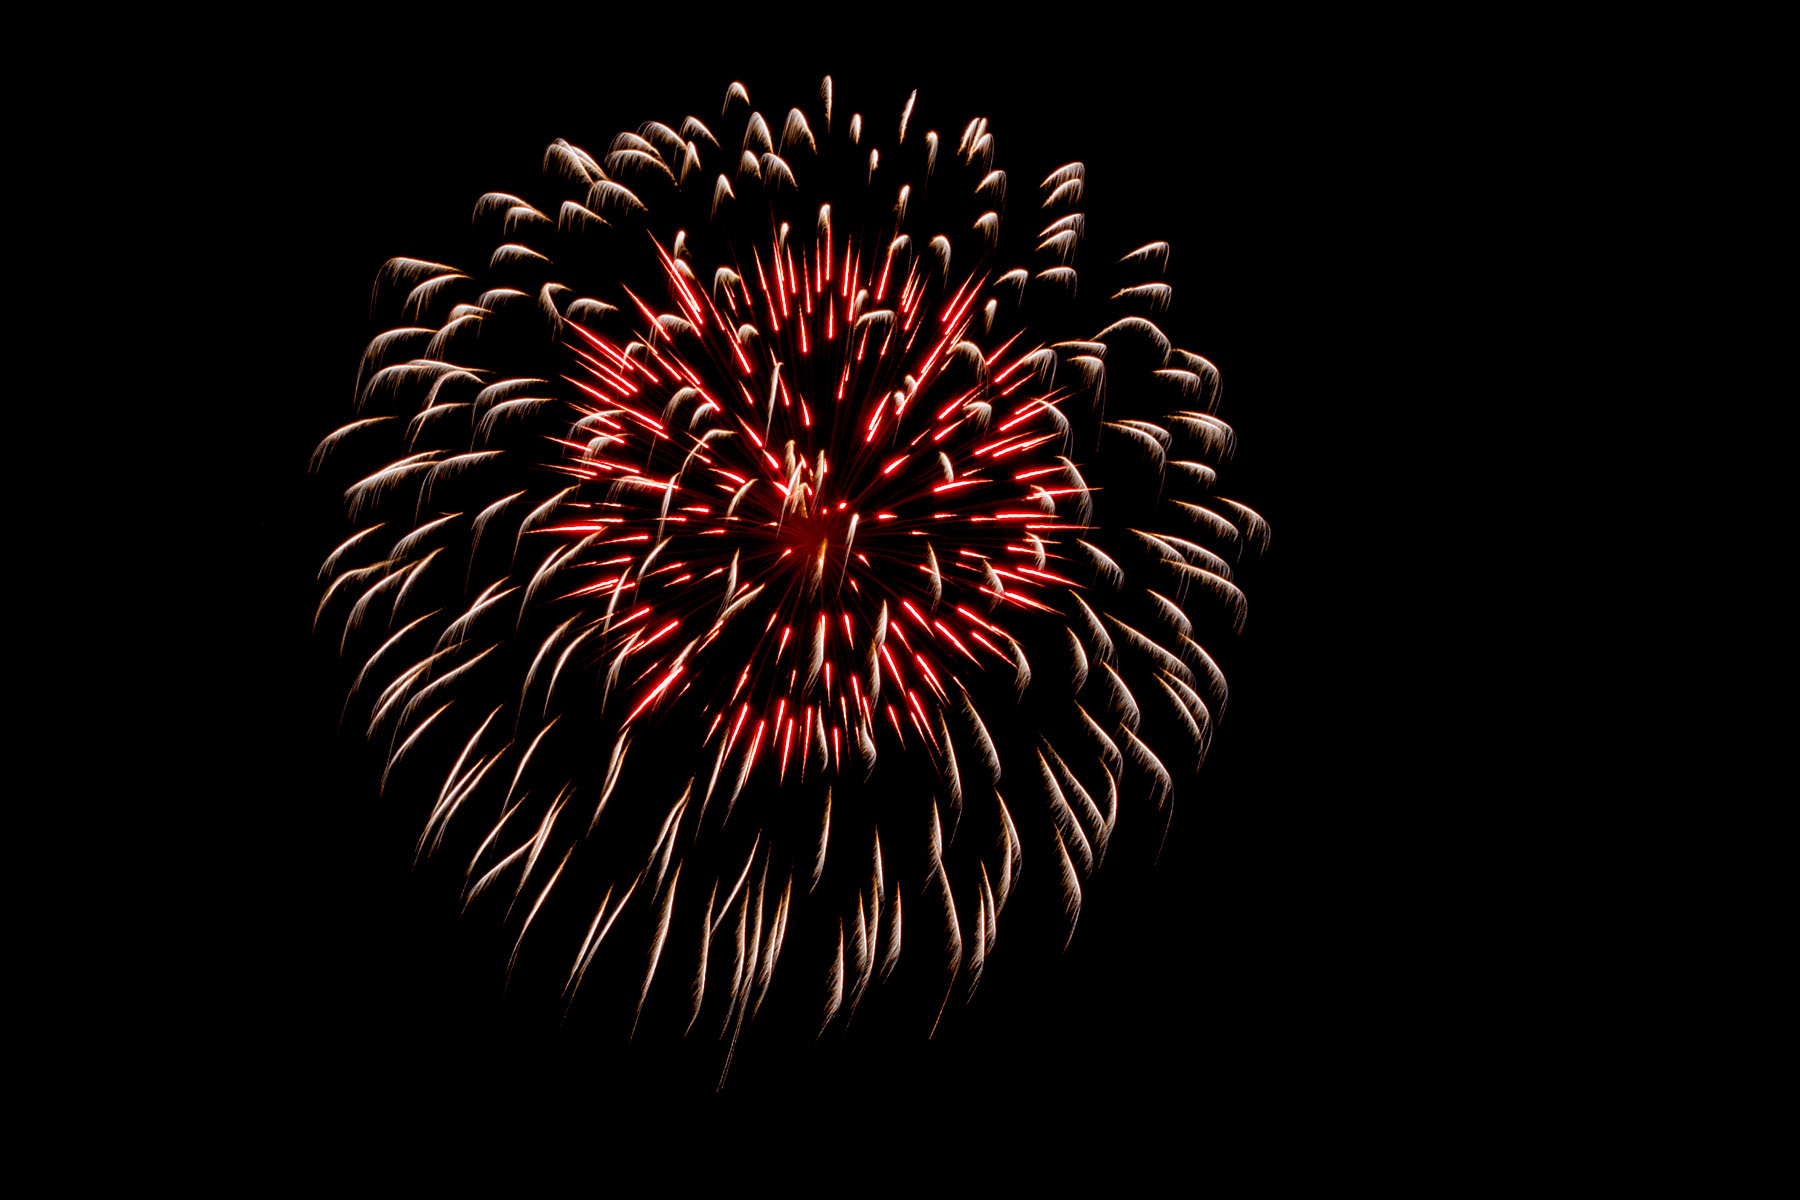 Fireworks, Red Lodge, MT, 4th of July 2019.  Click for next photo.